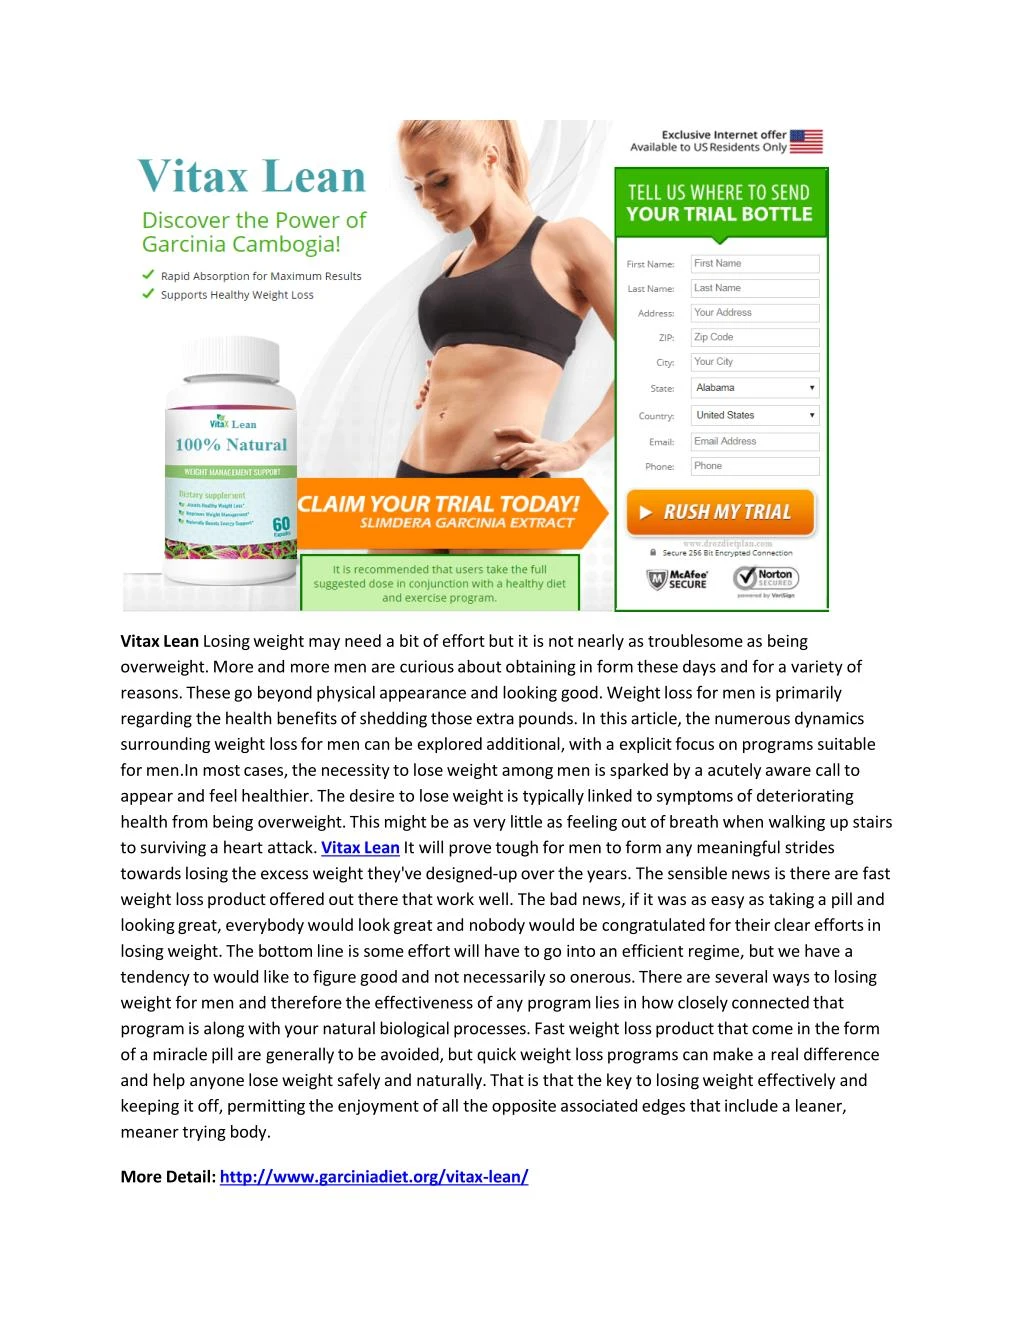 vitax lean losing weight may need a bit of effort